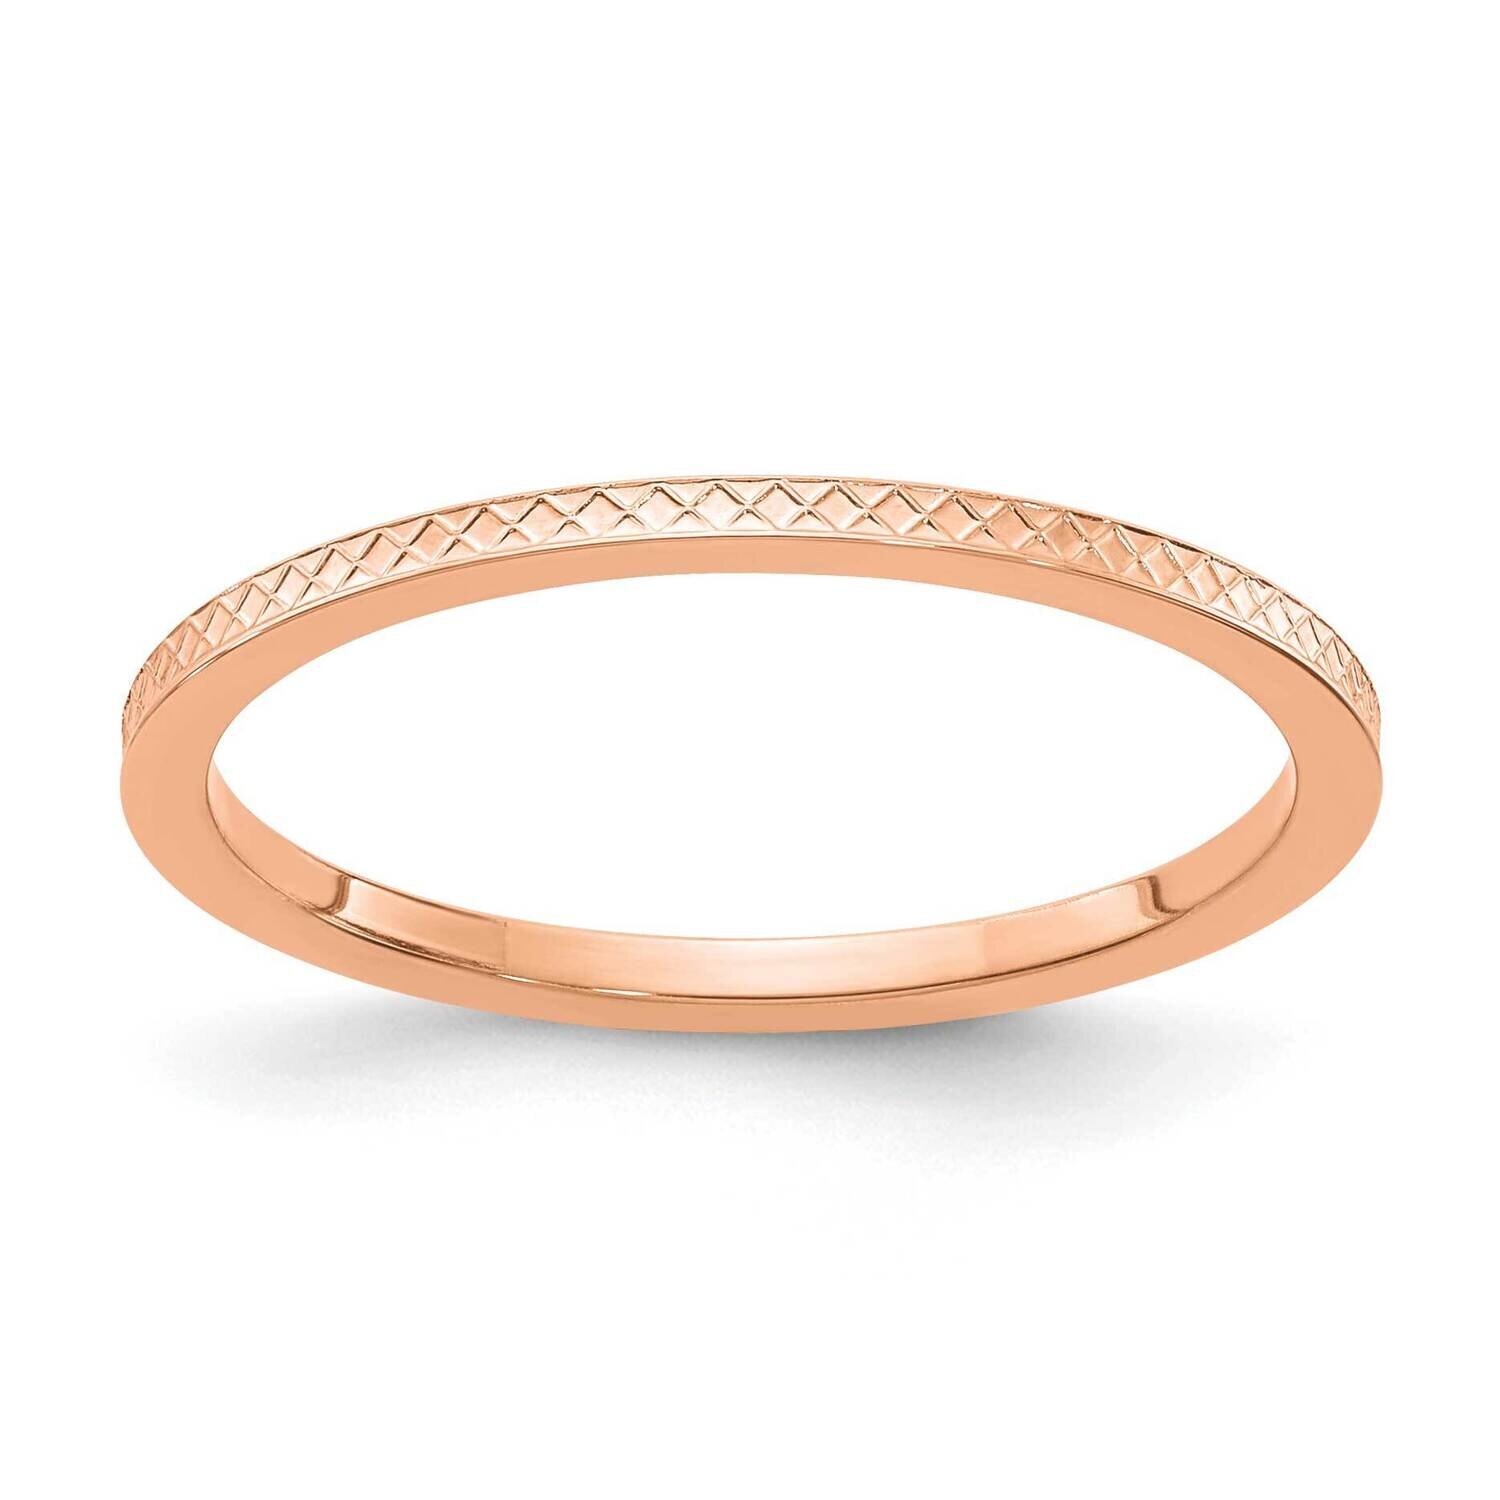 1.2mm Criss-Cross Pattern stackable Band 10K Rose Gold 1STK20-120R